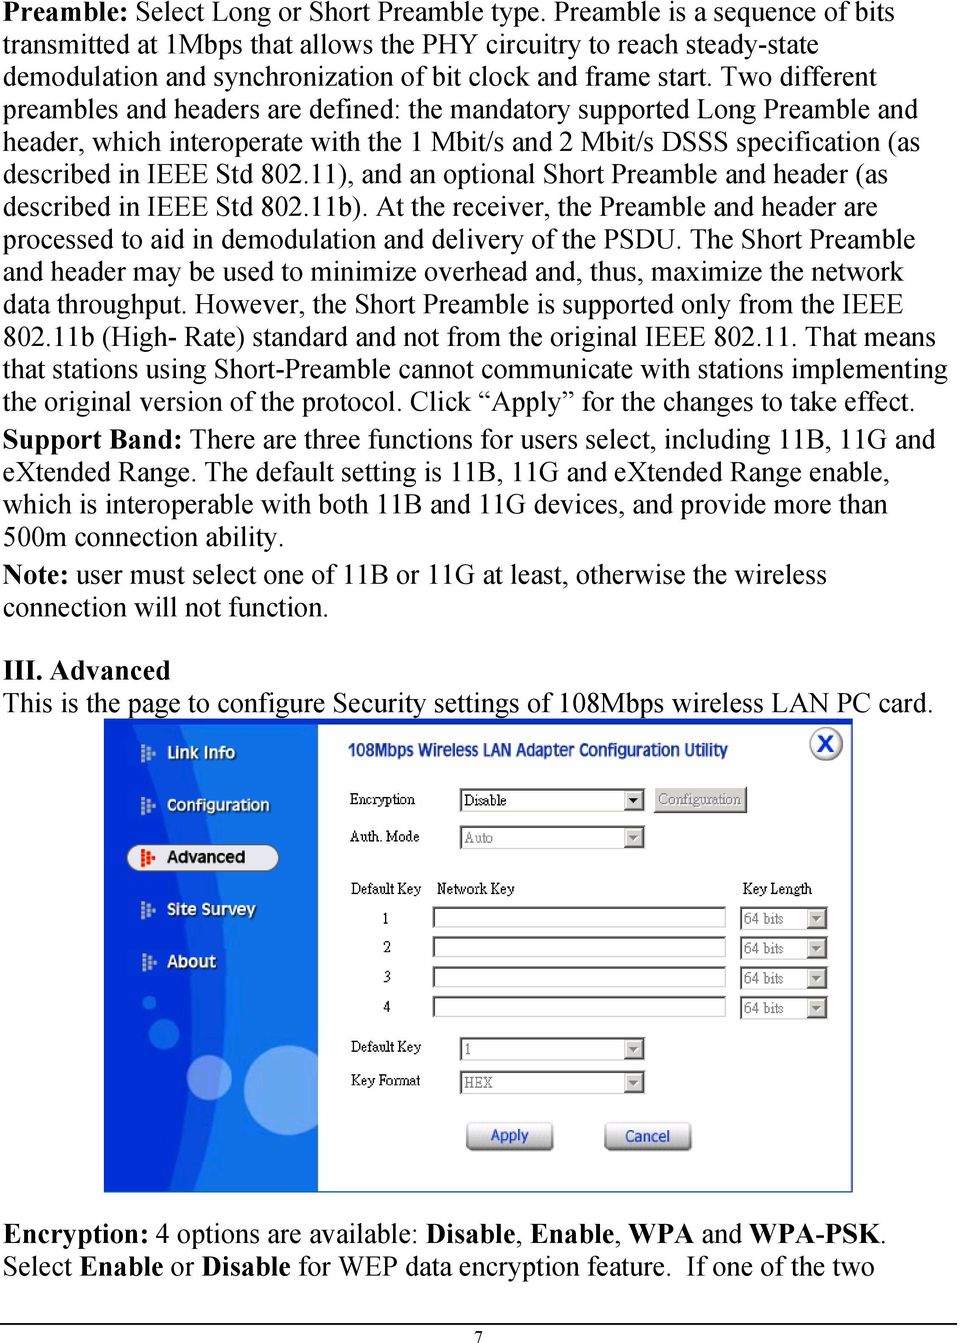 Two different preambles and headers are defined: the mandatory supported Long Preamble and header, which interoperate with the 1 Mbit/s and 2 Mbit/s DSSS specification (as described in IEEE Std 802.